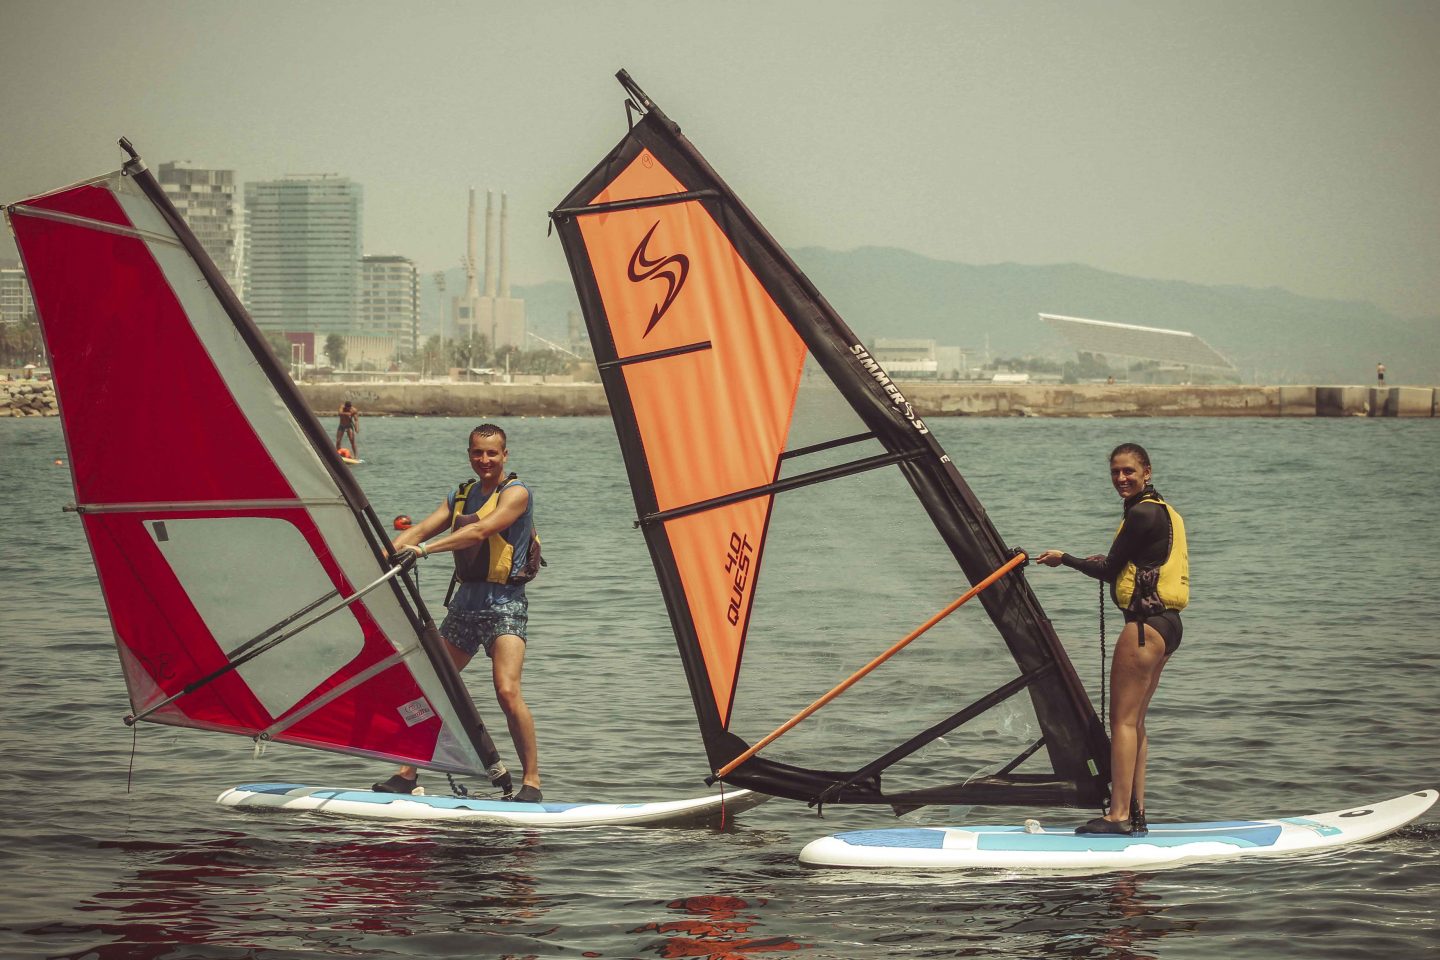 Our windsurf experience in Barcelona. How we enjoyed our beginning windsurfing classes in Barcelona.